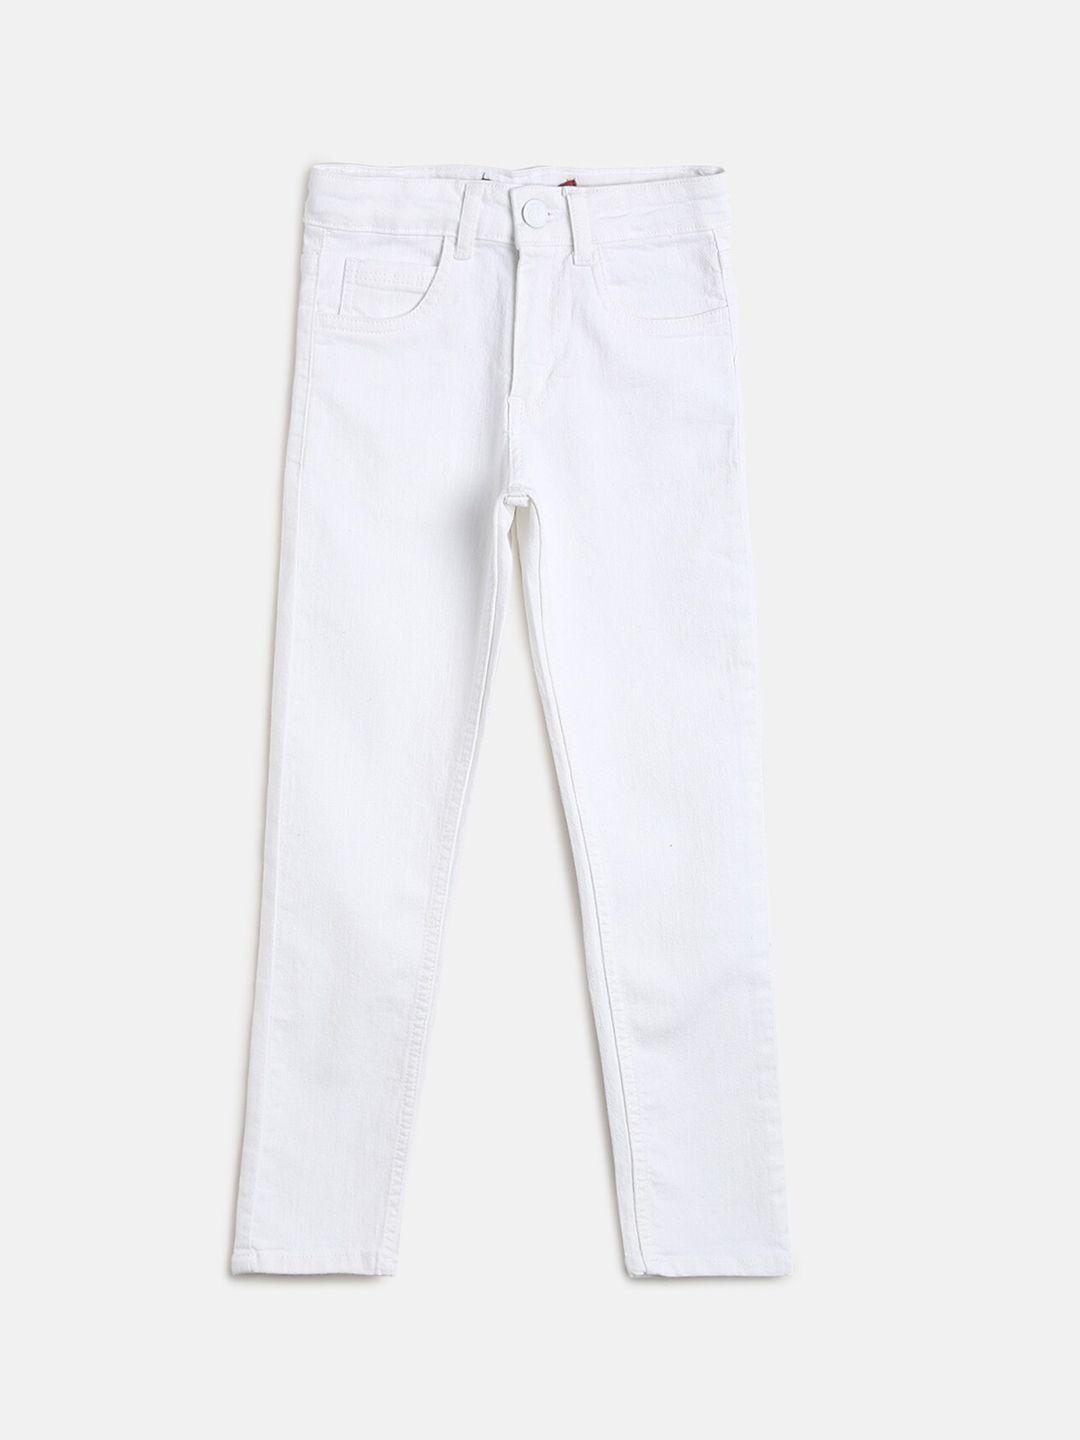 tales-&-stories-boys-white-slim-fit-trousers